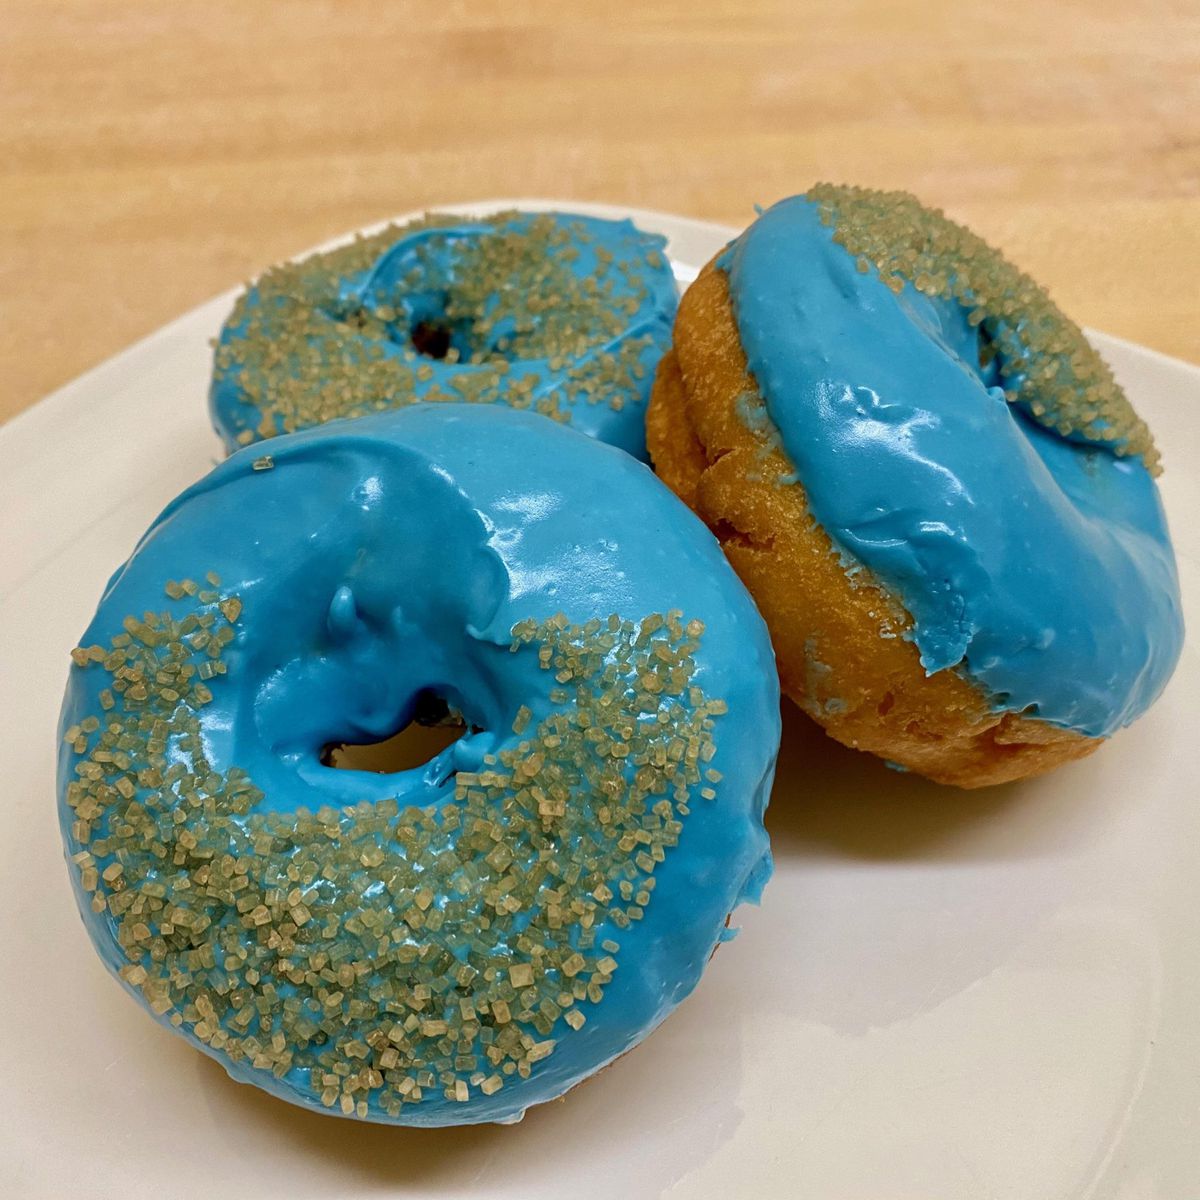 Three blue-frosted and sugared donuts on a white plate.